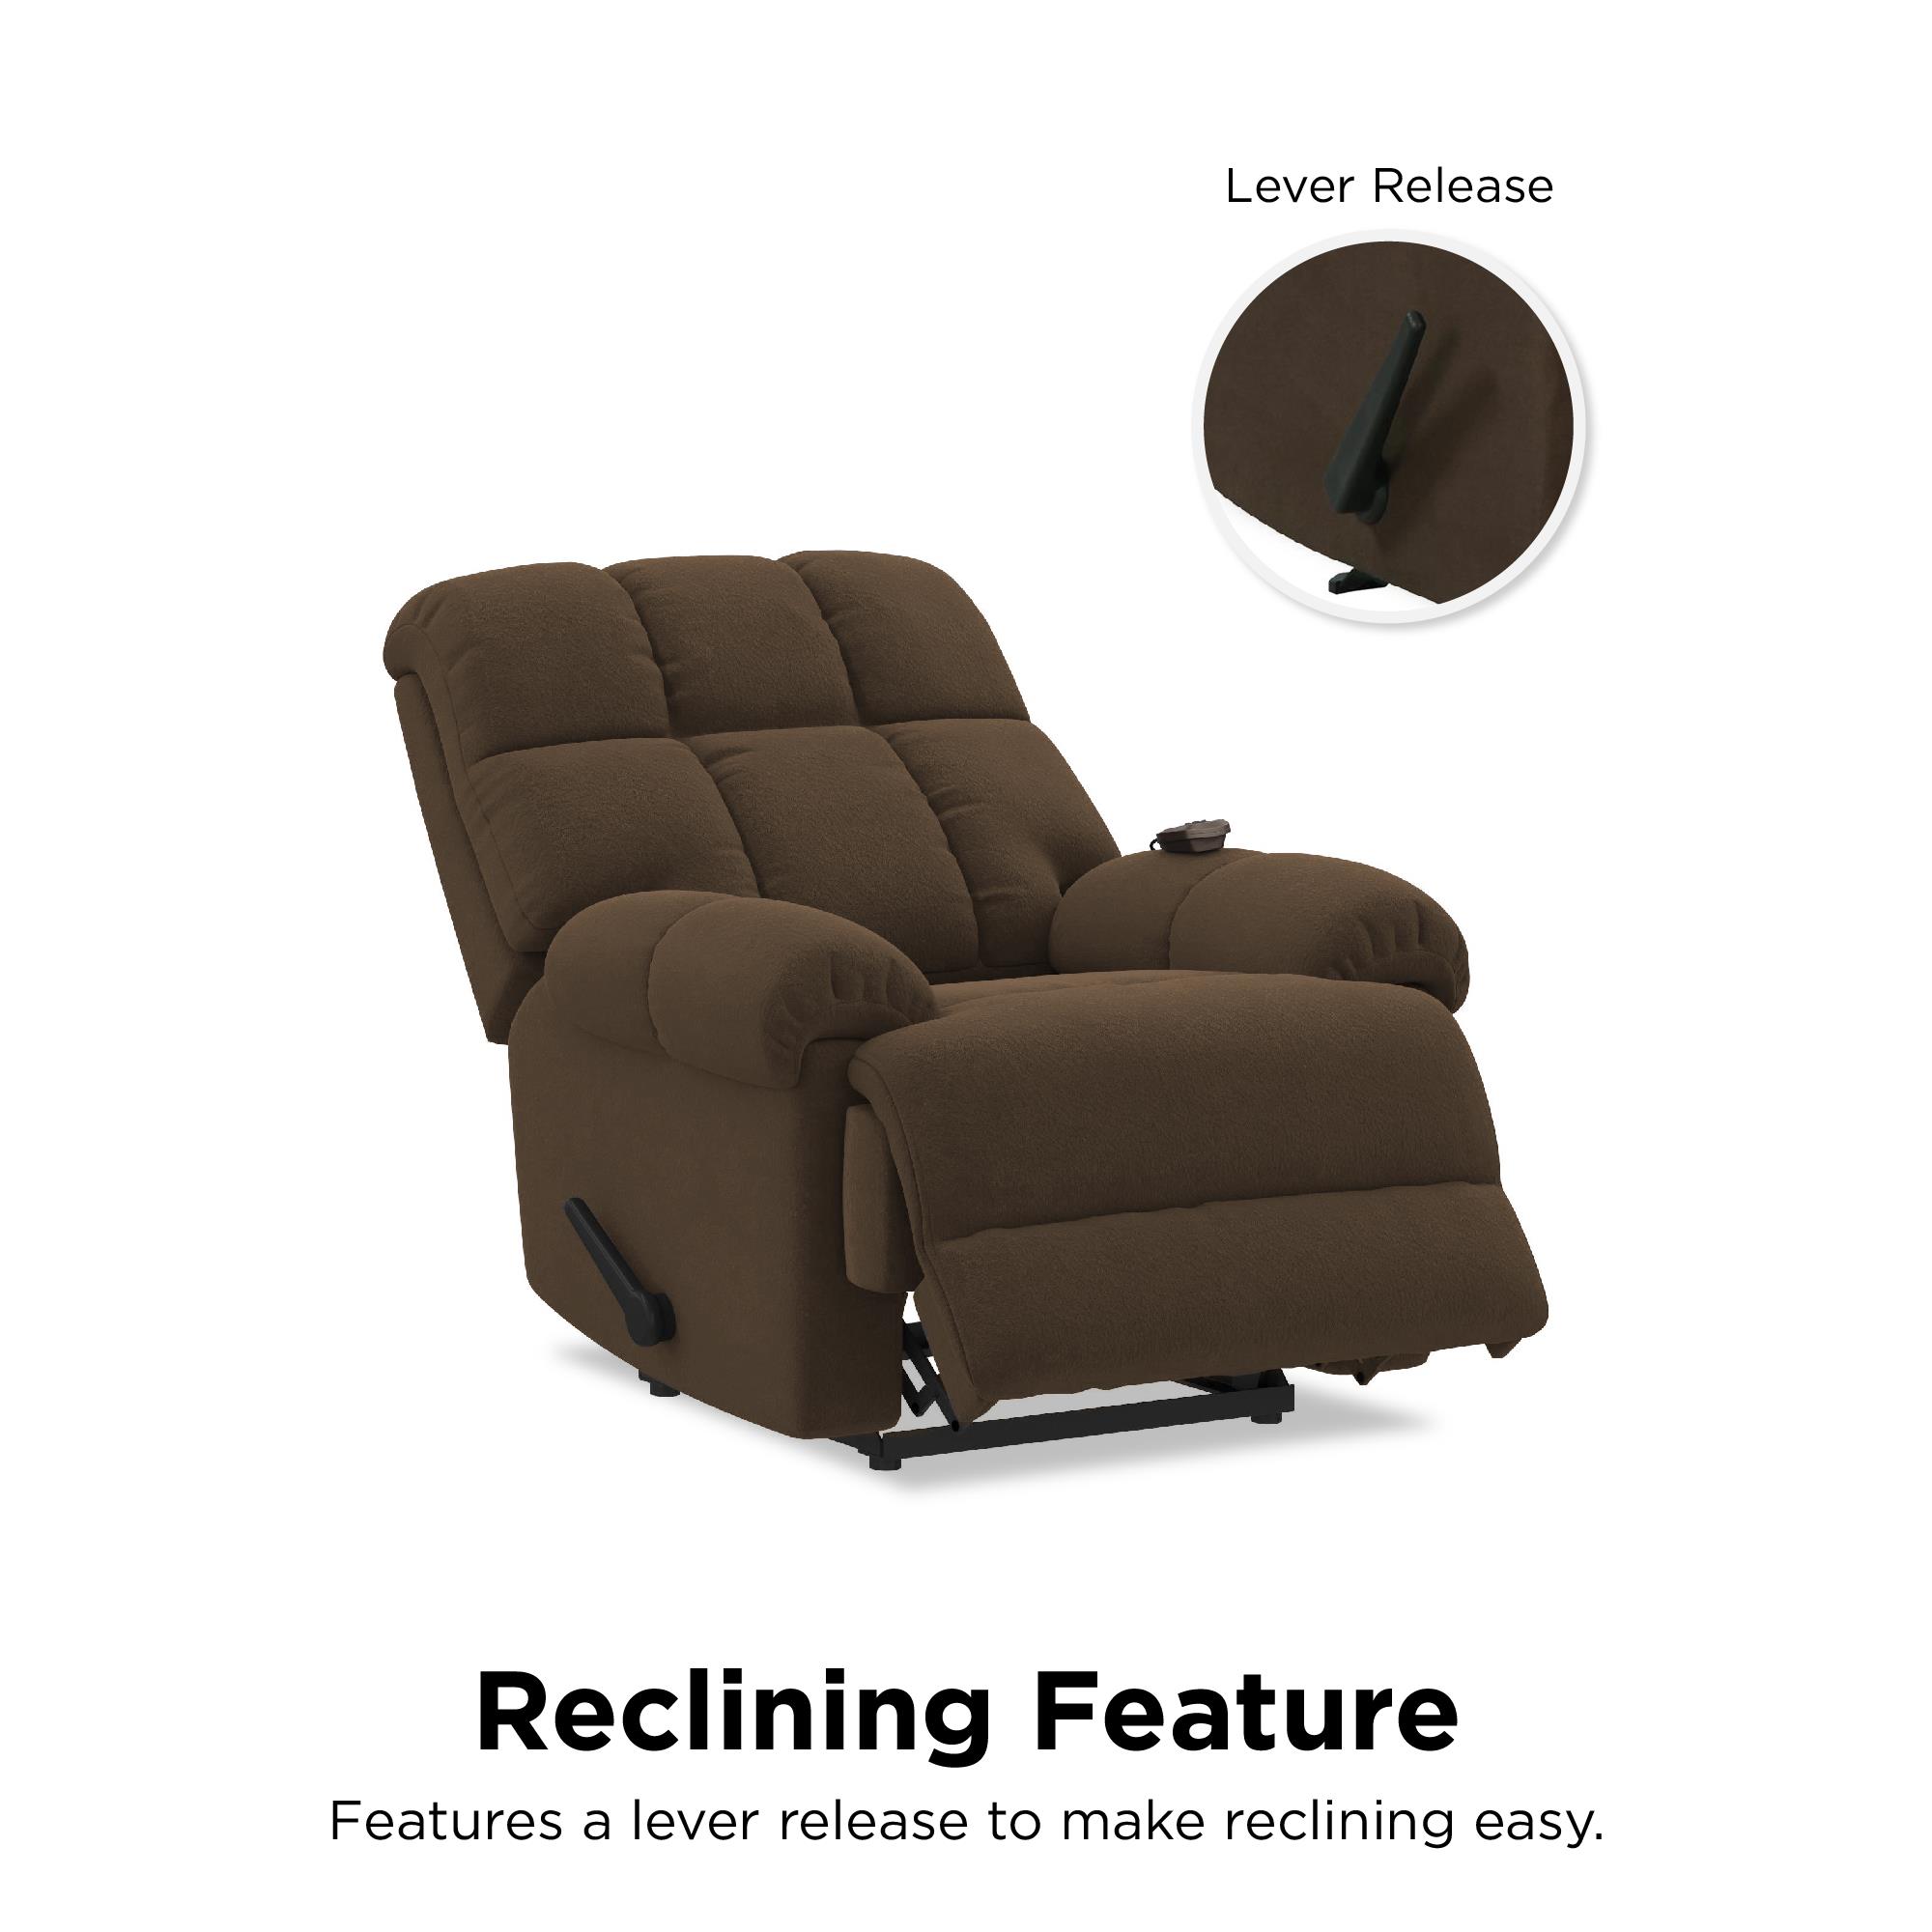 Elm & Oak Padded Massage Chair Recliner, Chocolate Upholstery - image 5 of 12